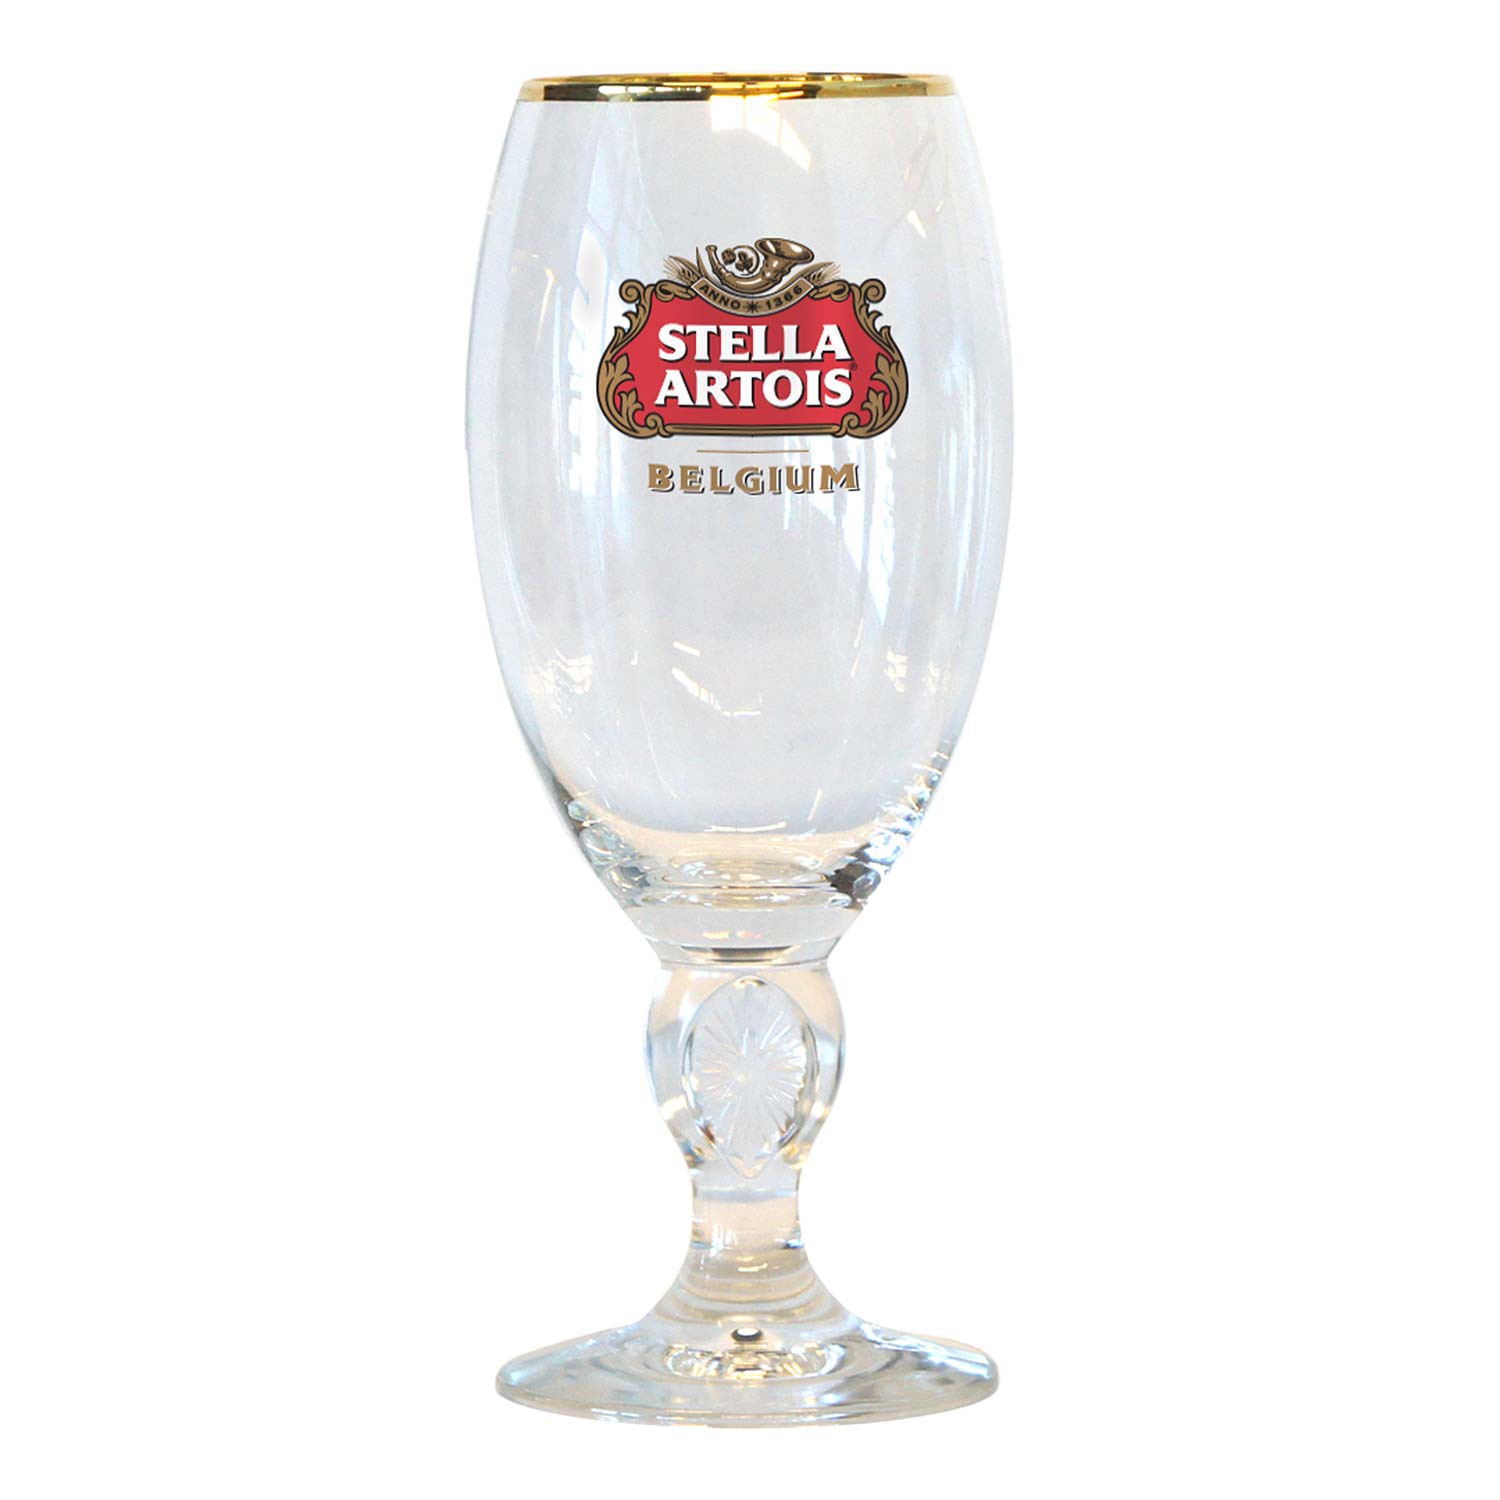 https://mmv2api.s3.us-east-2.amazonaws.com/products/images/Stella_33cl_Chalice_Glass_LG.jpg